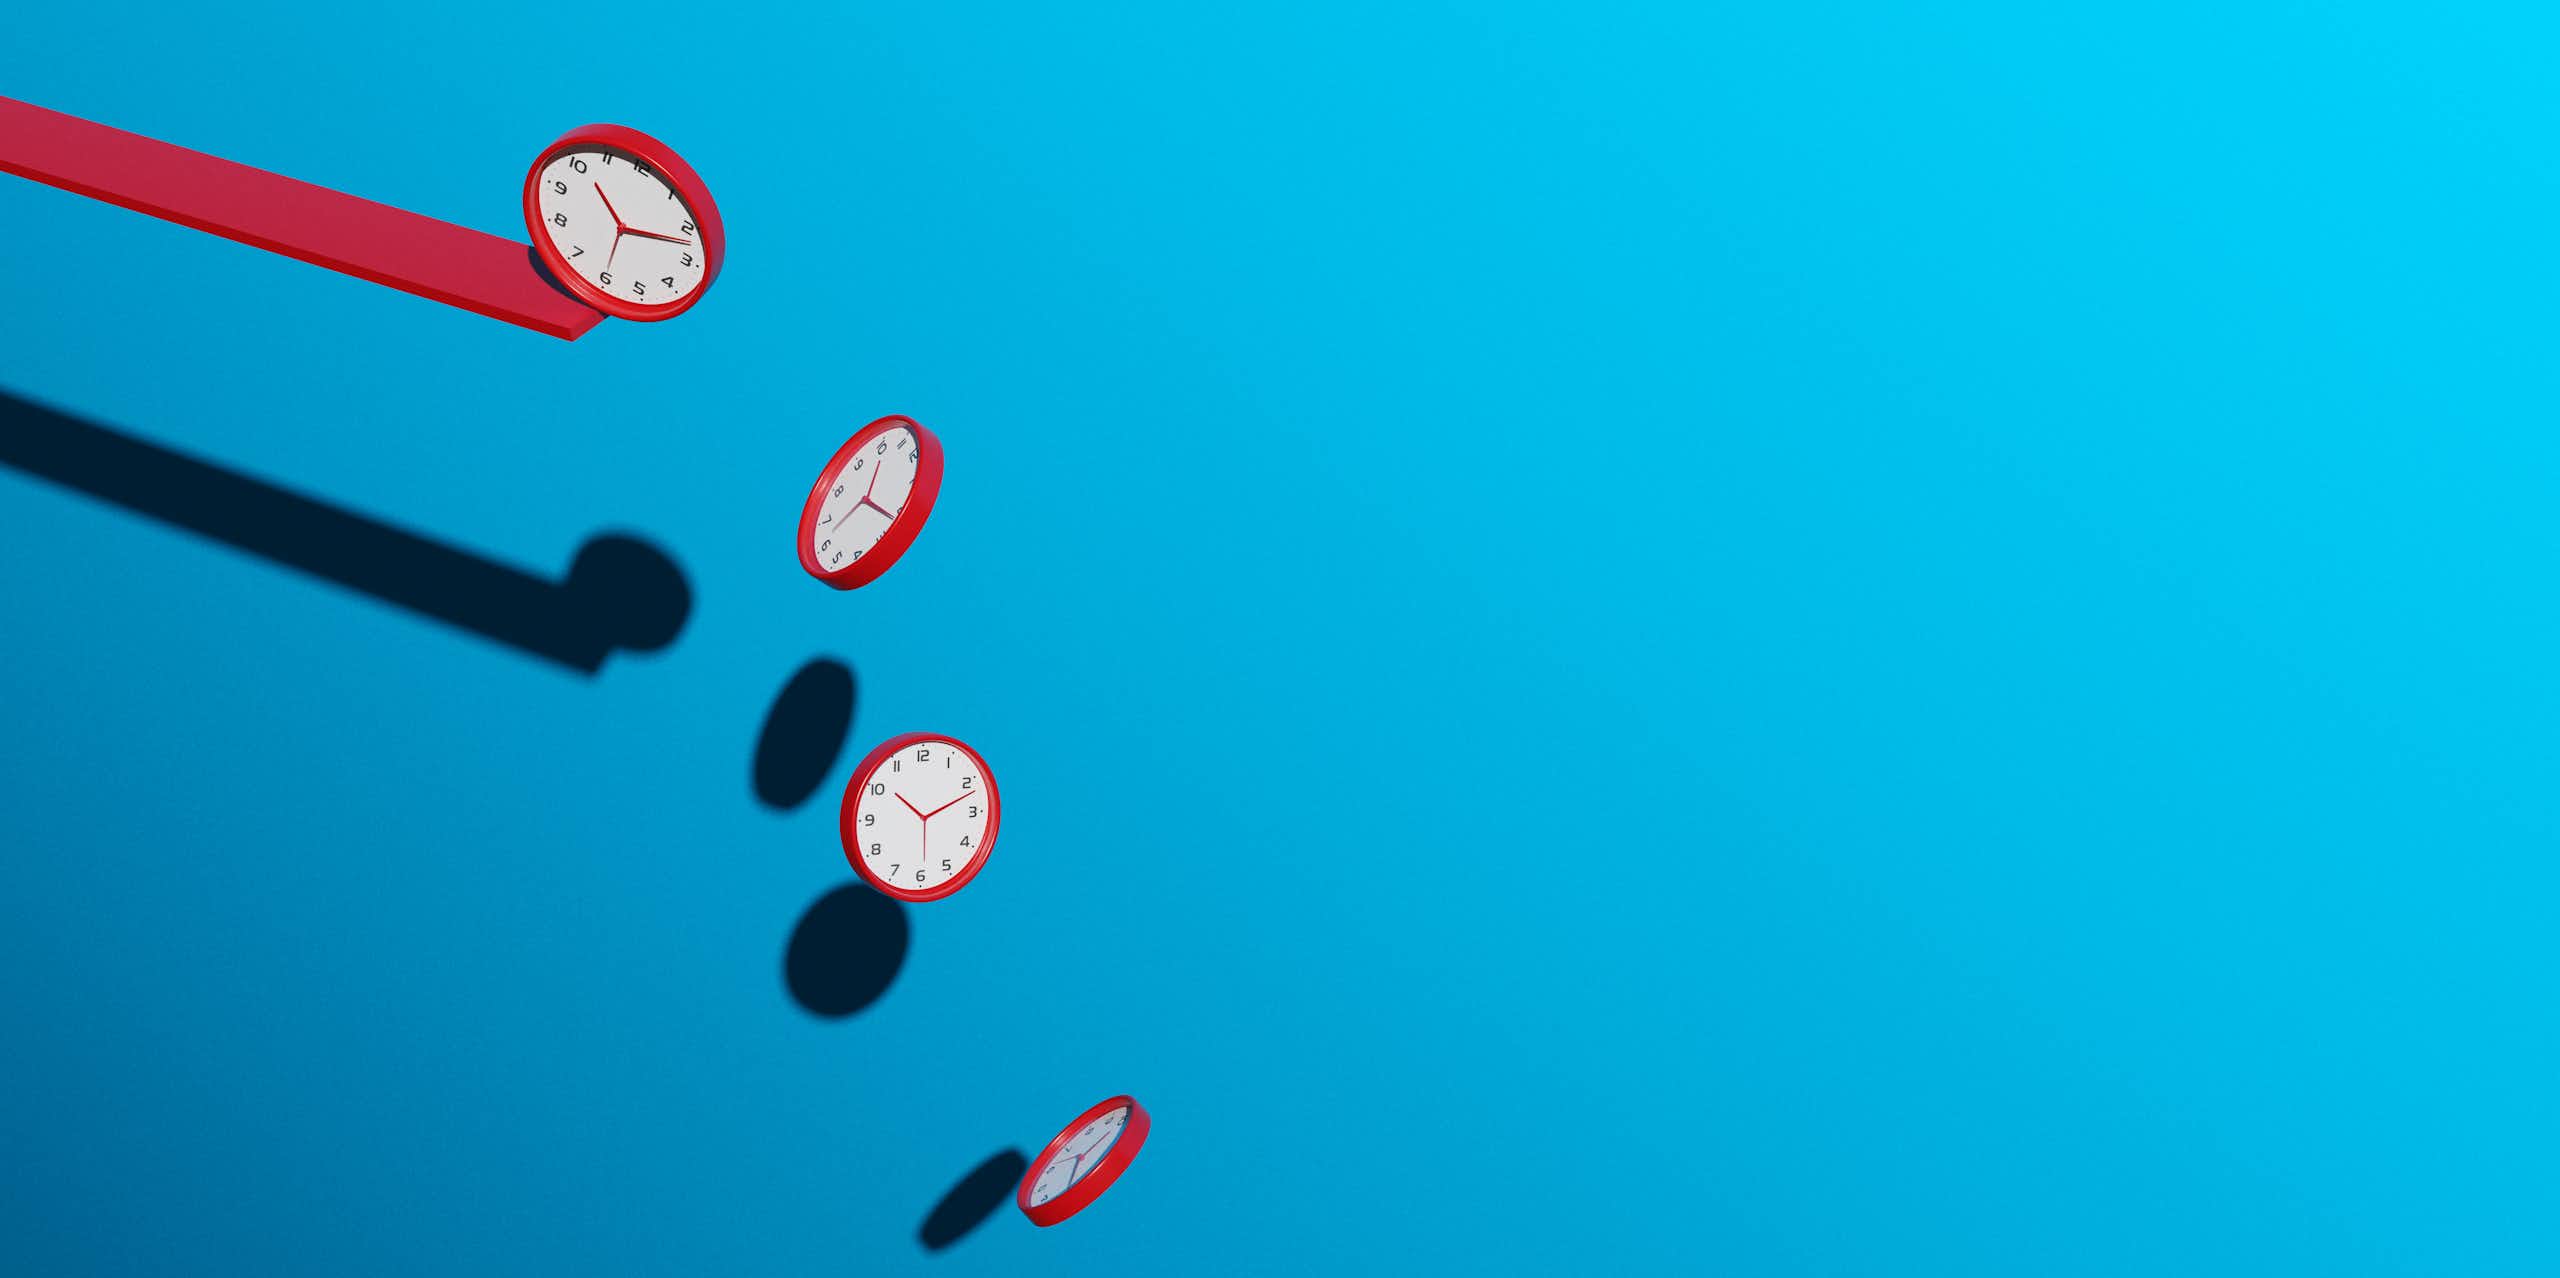 Five clocks falling from a red plank against a blue background.